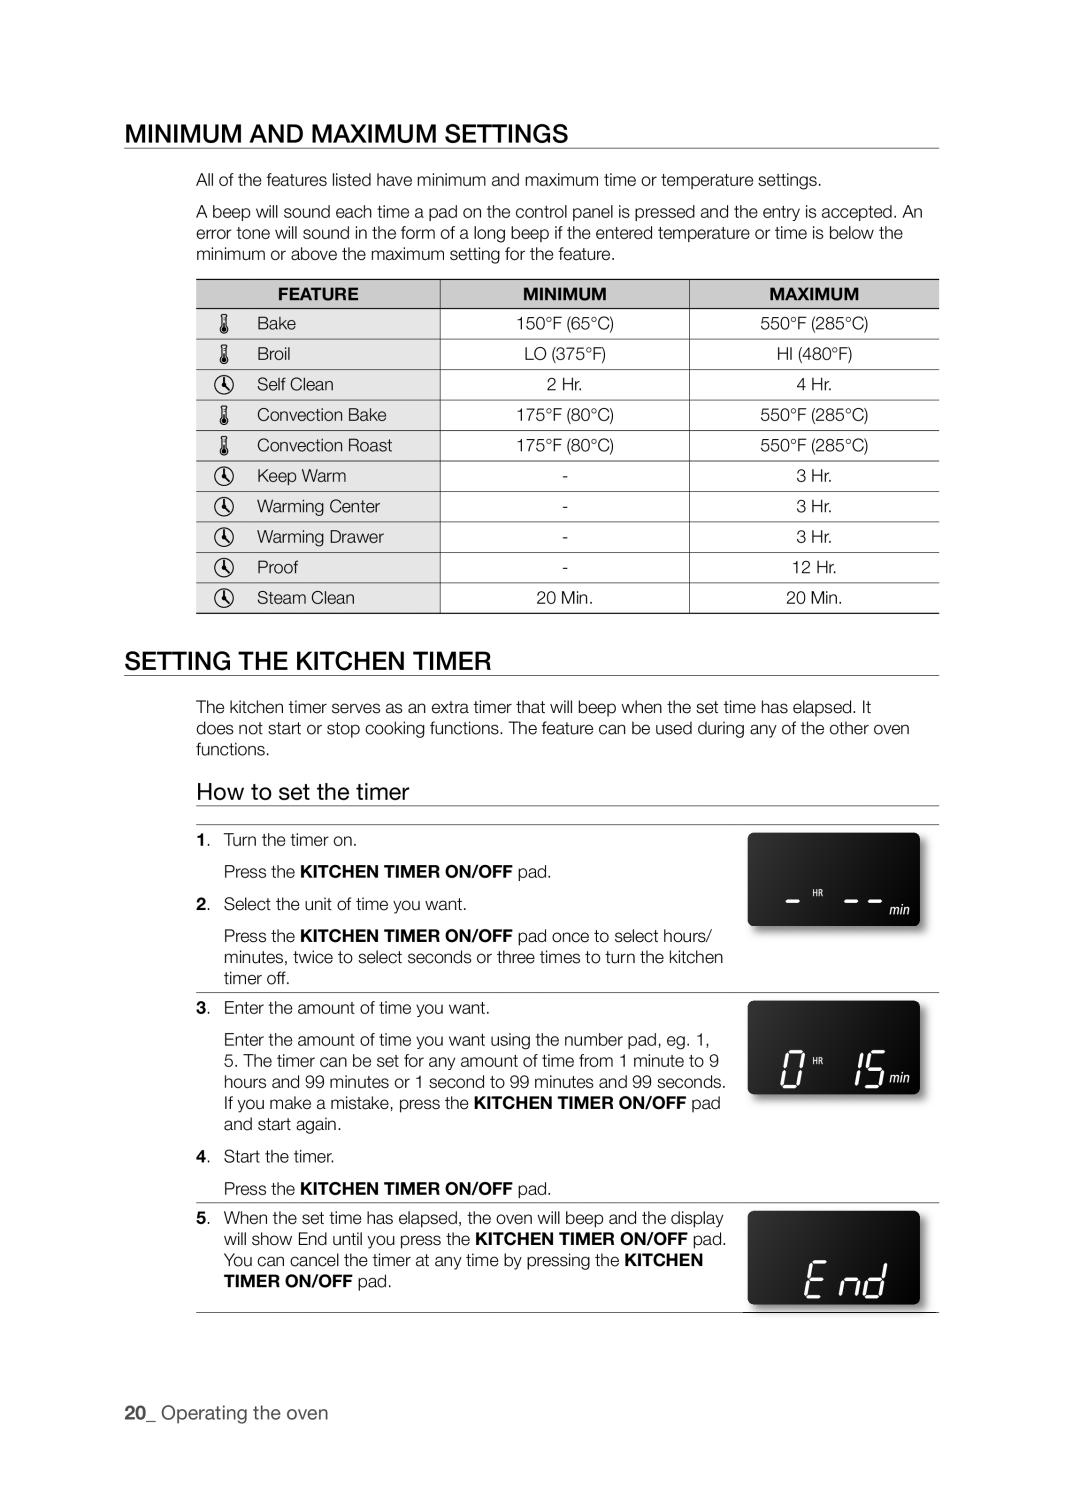 Samsung FTQ352IWX Minimum And Maximum Settings, Setting The Kitchen Timer, How to set the timer, 20_ Operating the oven 